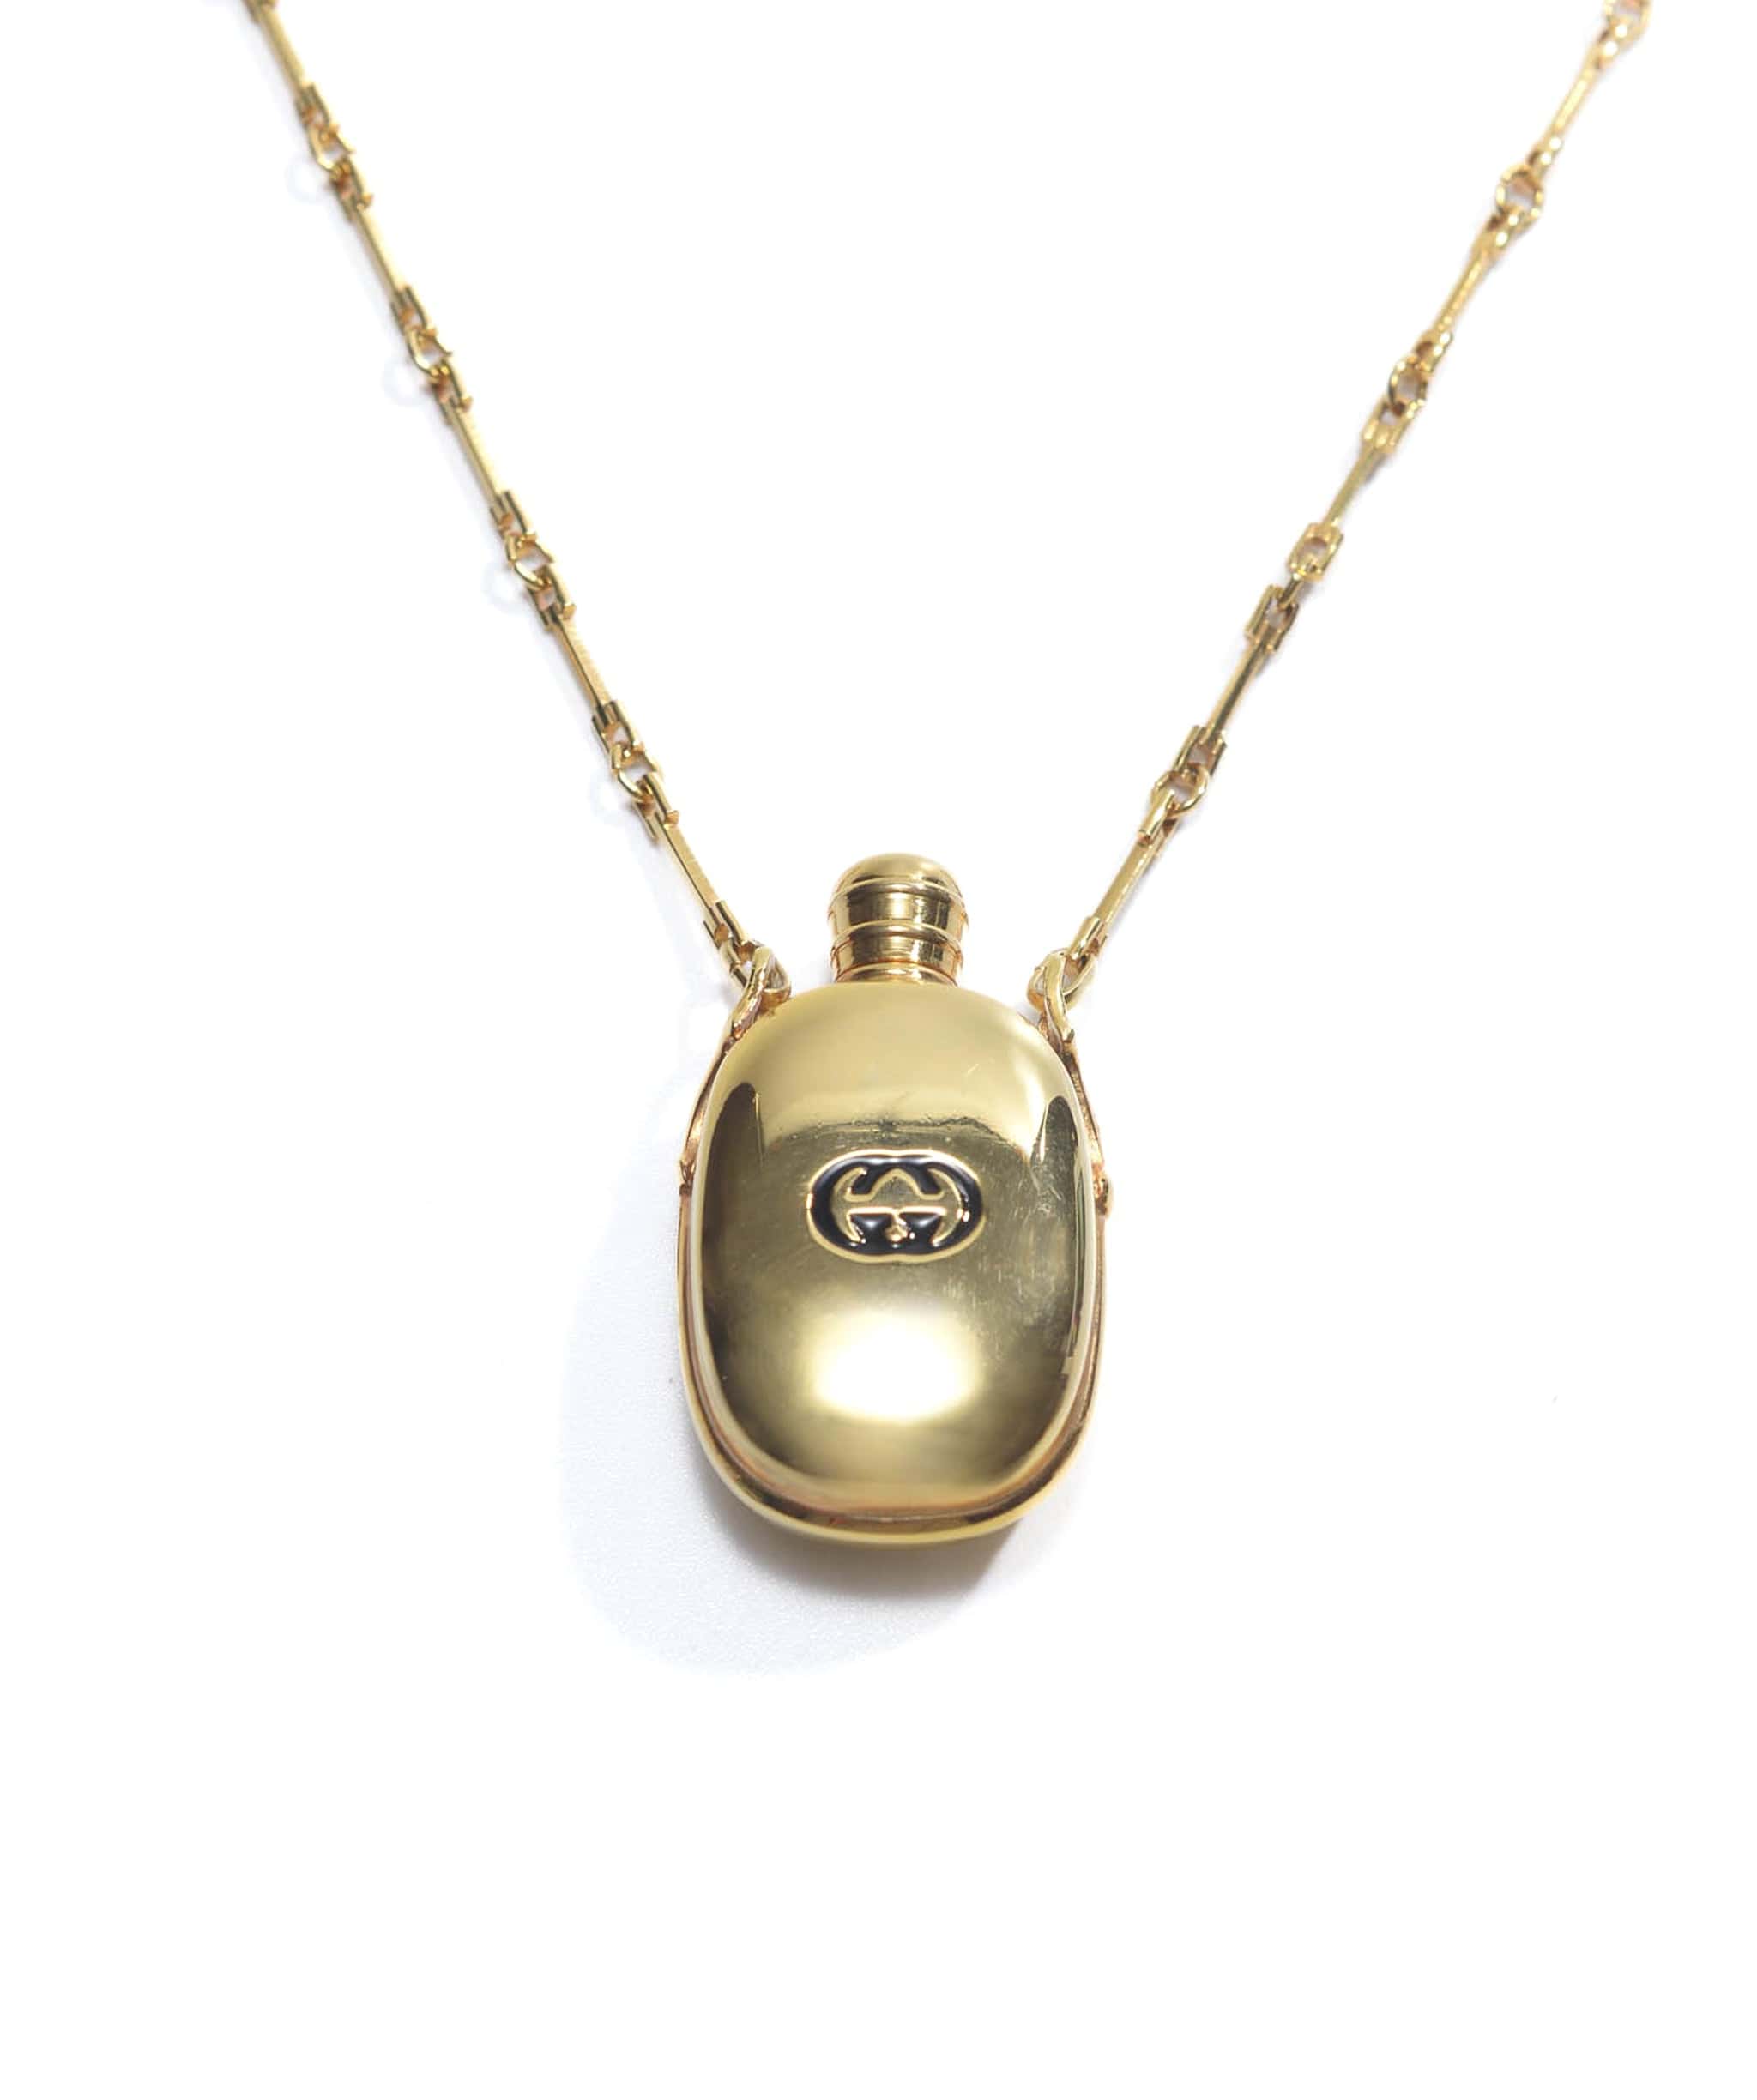 Gucci Gucci perfume bottle necklace - AWC1726